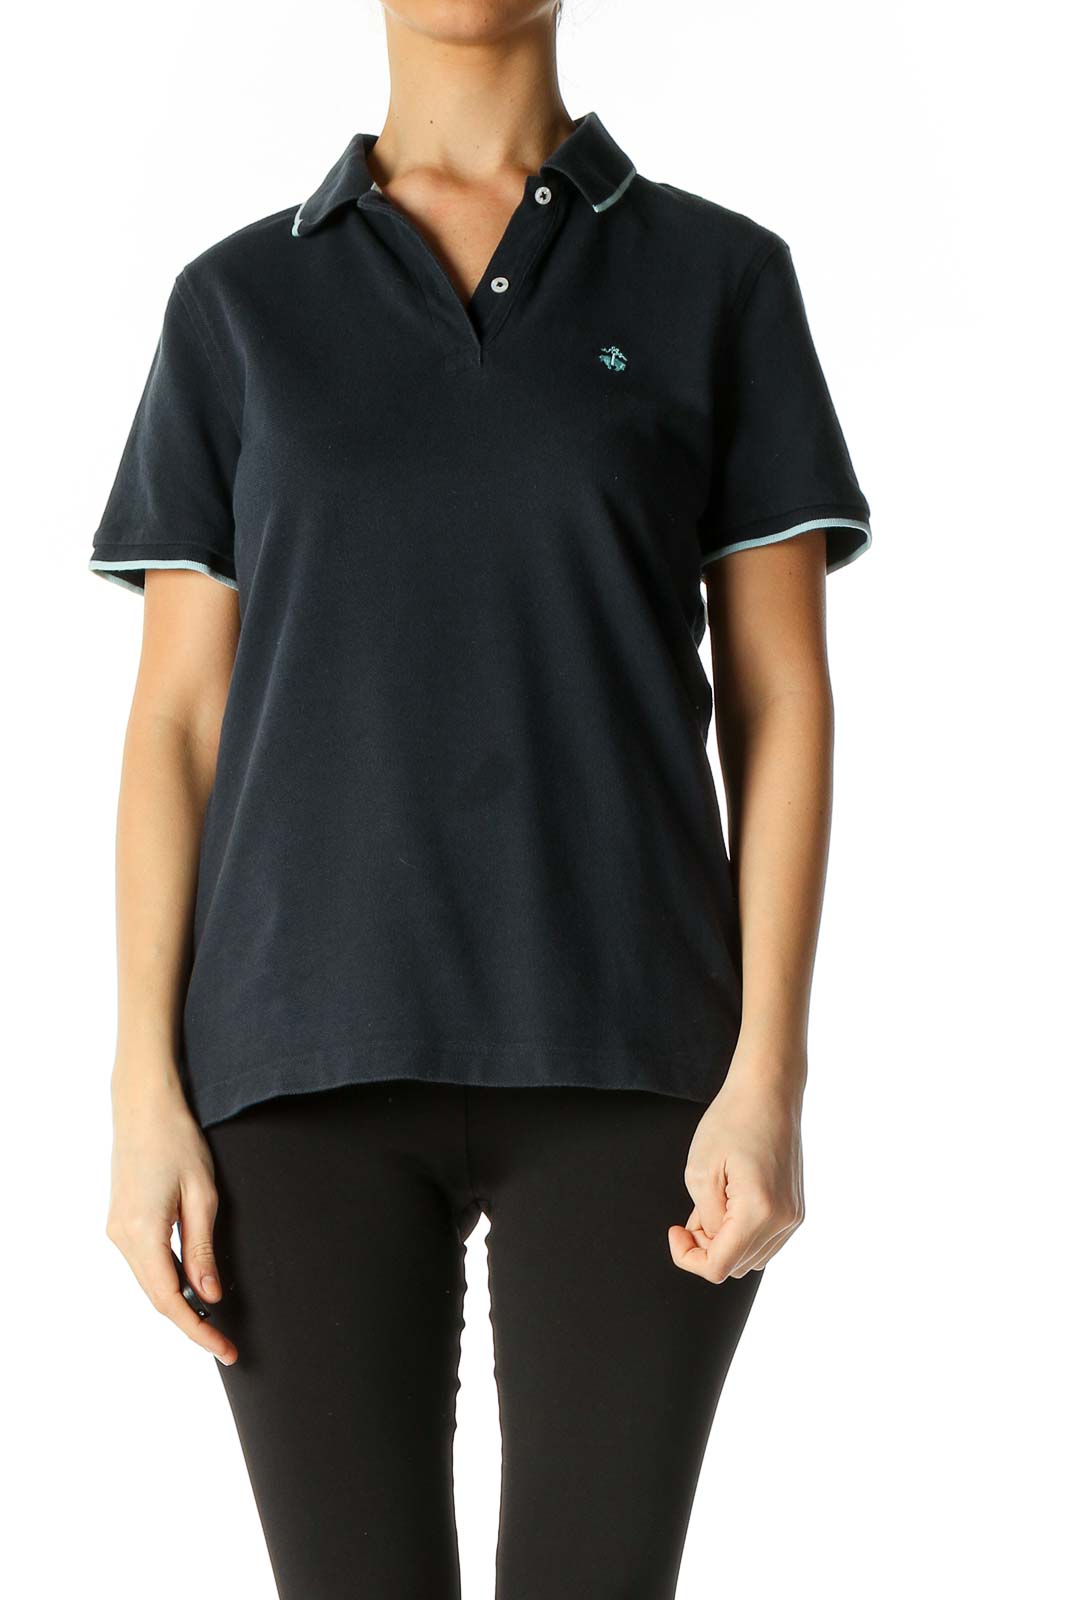 Black Solid Casual Polo Shirt Front